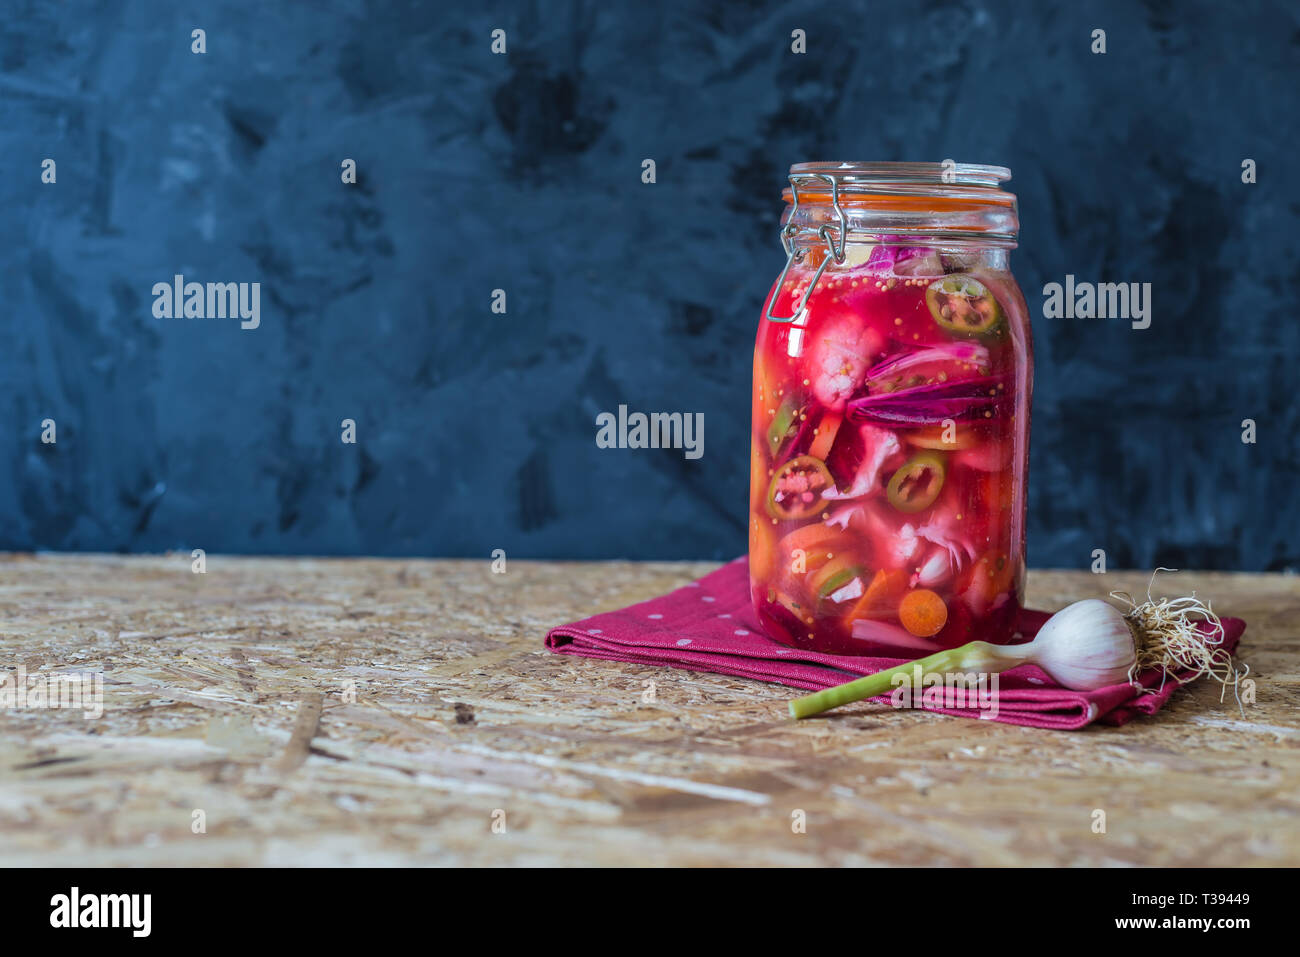 Jar of pickled vegetables by Indian traditional recipe Stock Photo